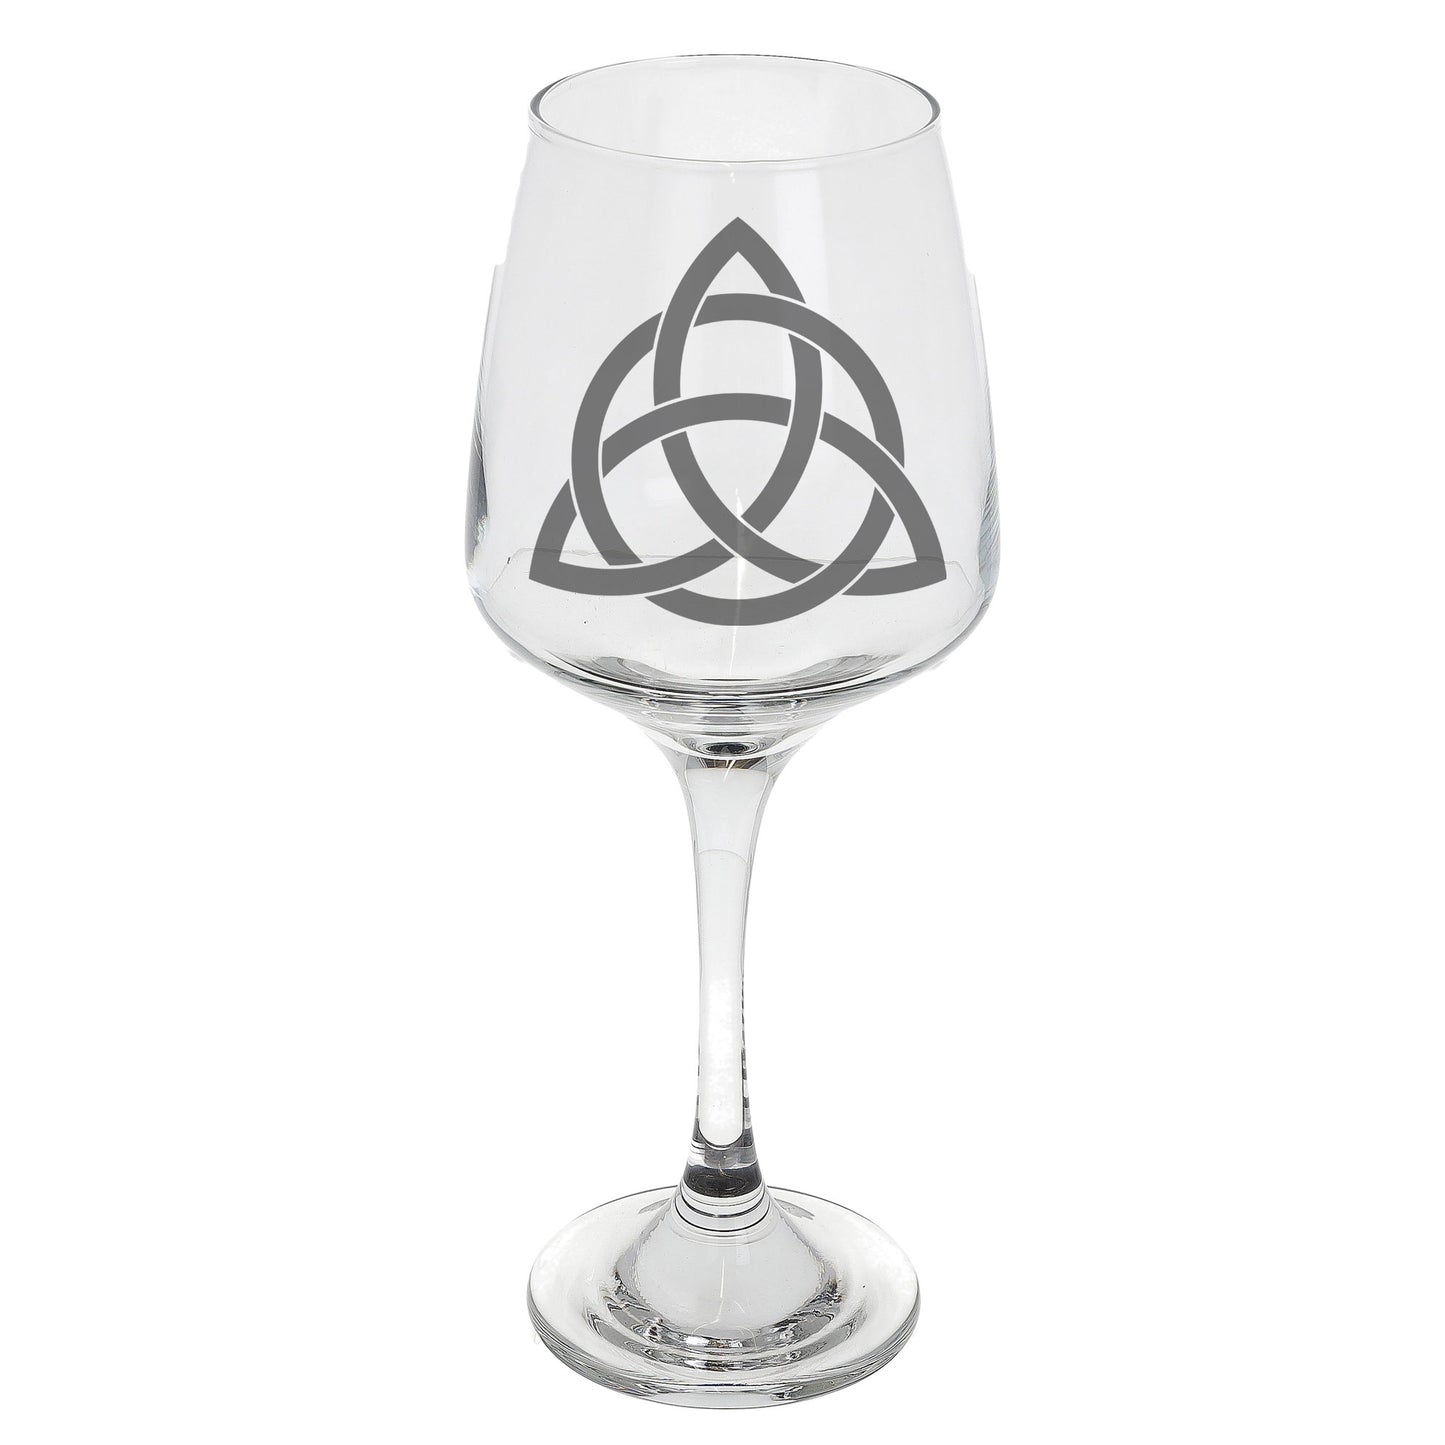 Celtic Knot Irish Engraved Wine Glass and/or Coaster Set  - Always Looking Good - Wine Glass Only  